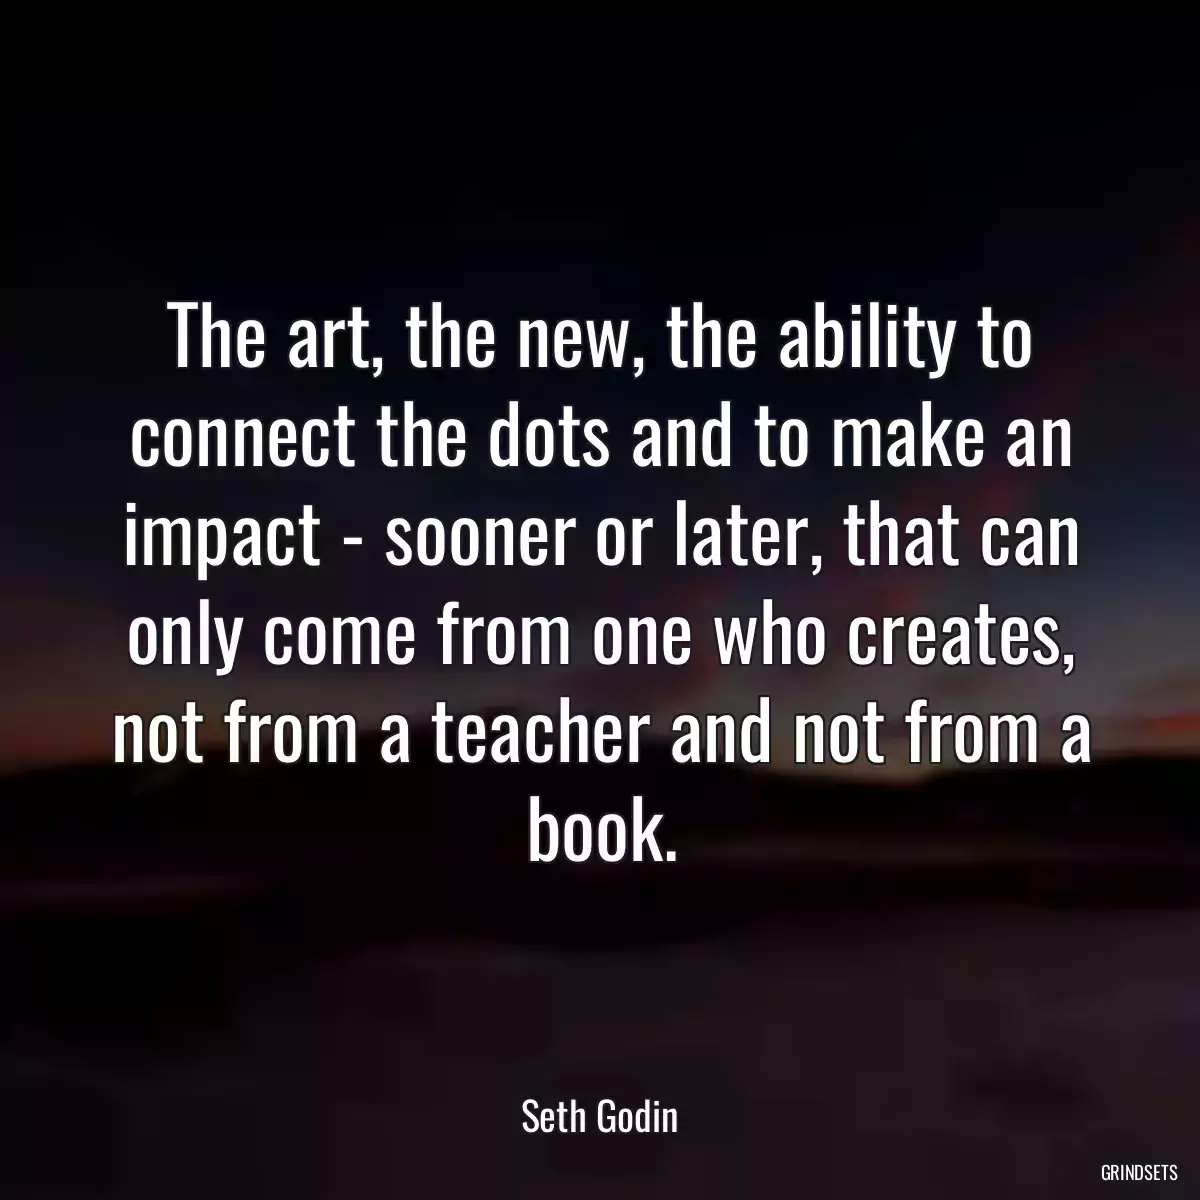 The art, the new, the ability to connect the dots and to make an impact - sooner or later, that can only come from one who creates, not from a teacher and not from a book.